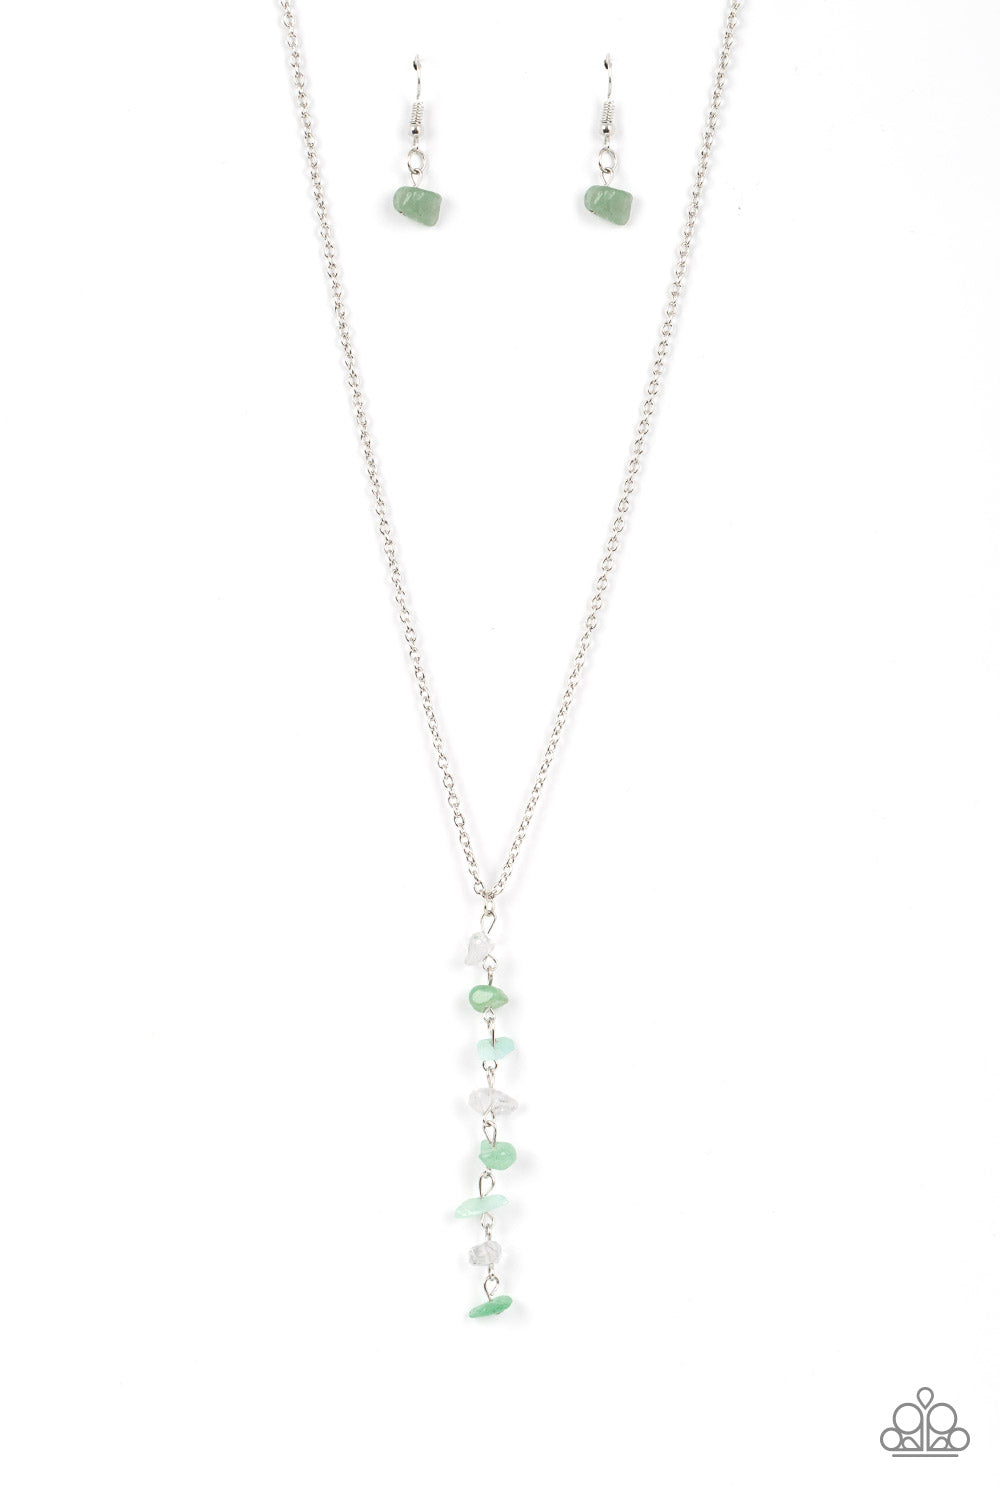 Paparazzi Accessories Tranquil Tidings - Green A dainty stack of quartz, jade, and aventurine pebbles trickles from the bottom of a classic silver chain, creating a tranquil extended pendant down the chest. Features an adjustable clasp closure. As the sto